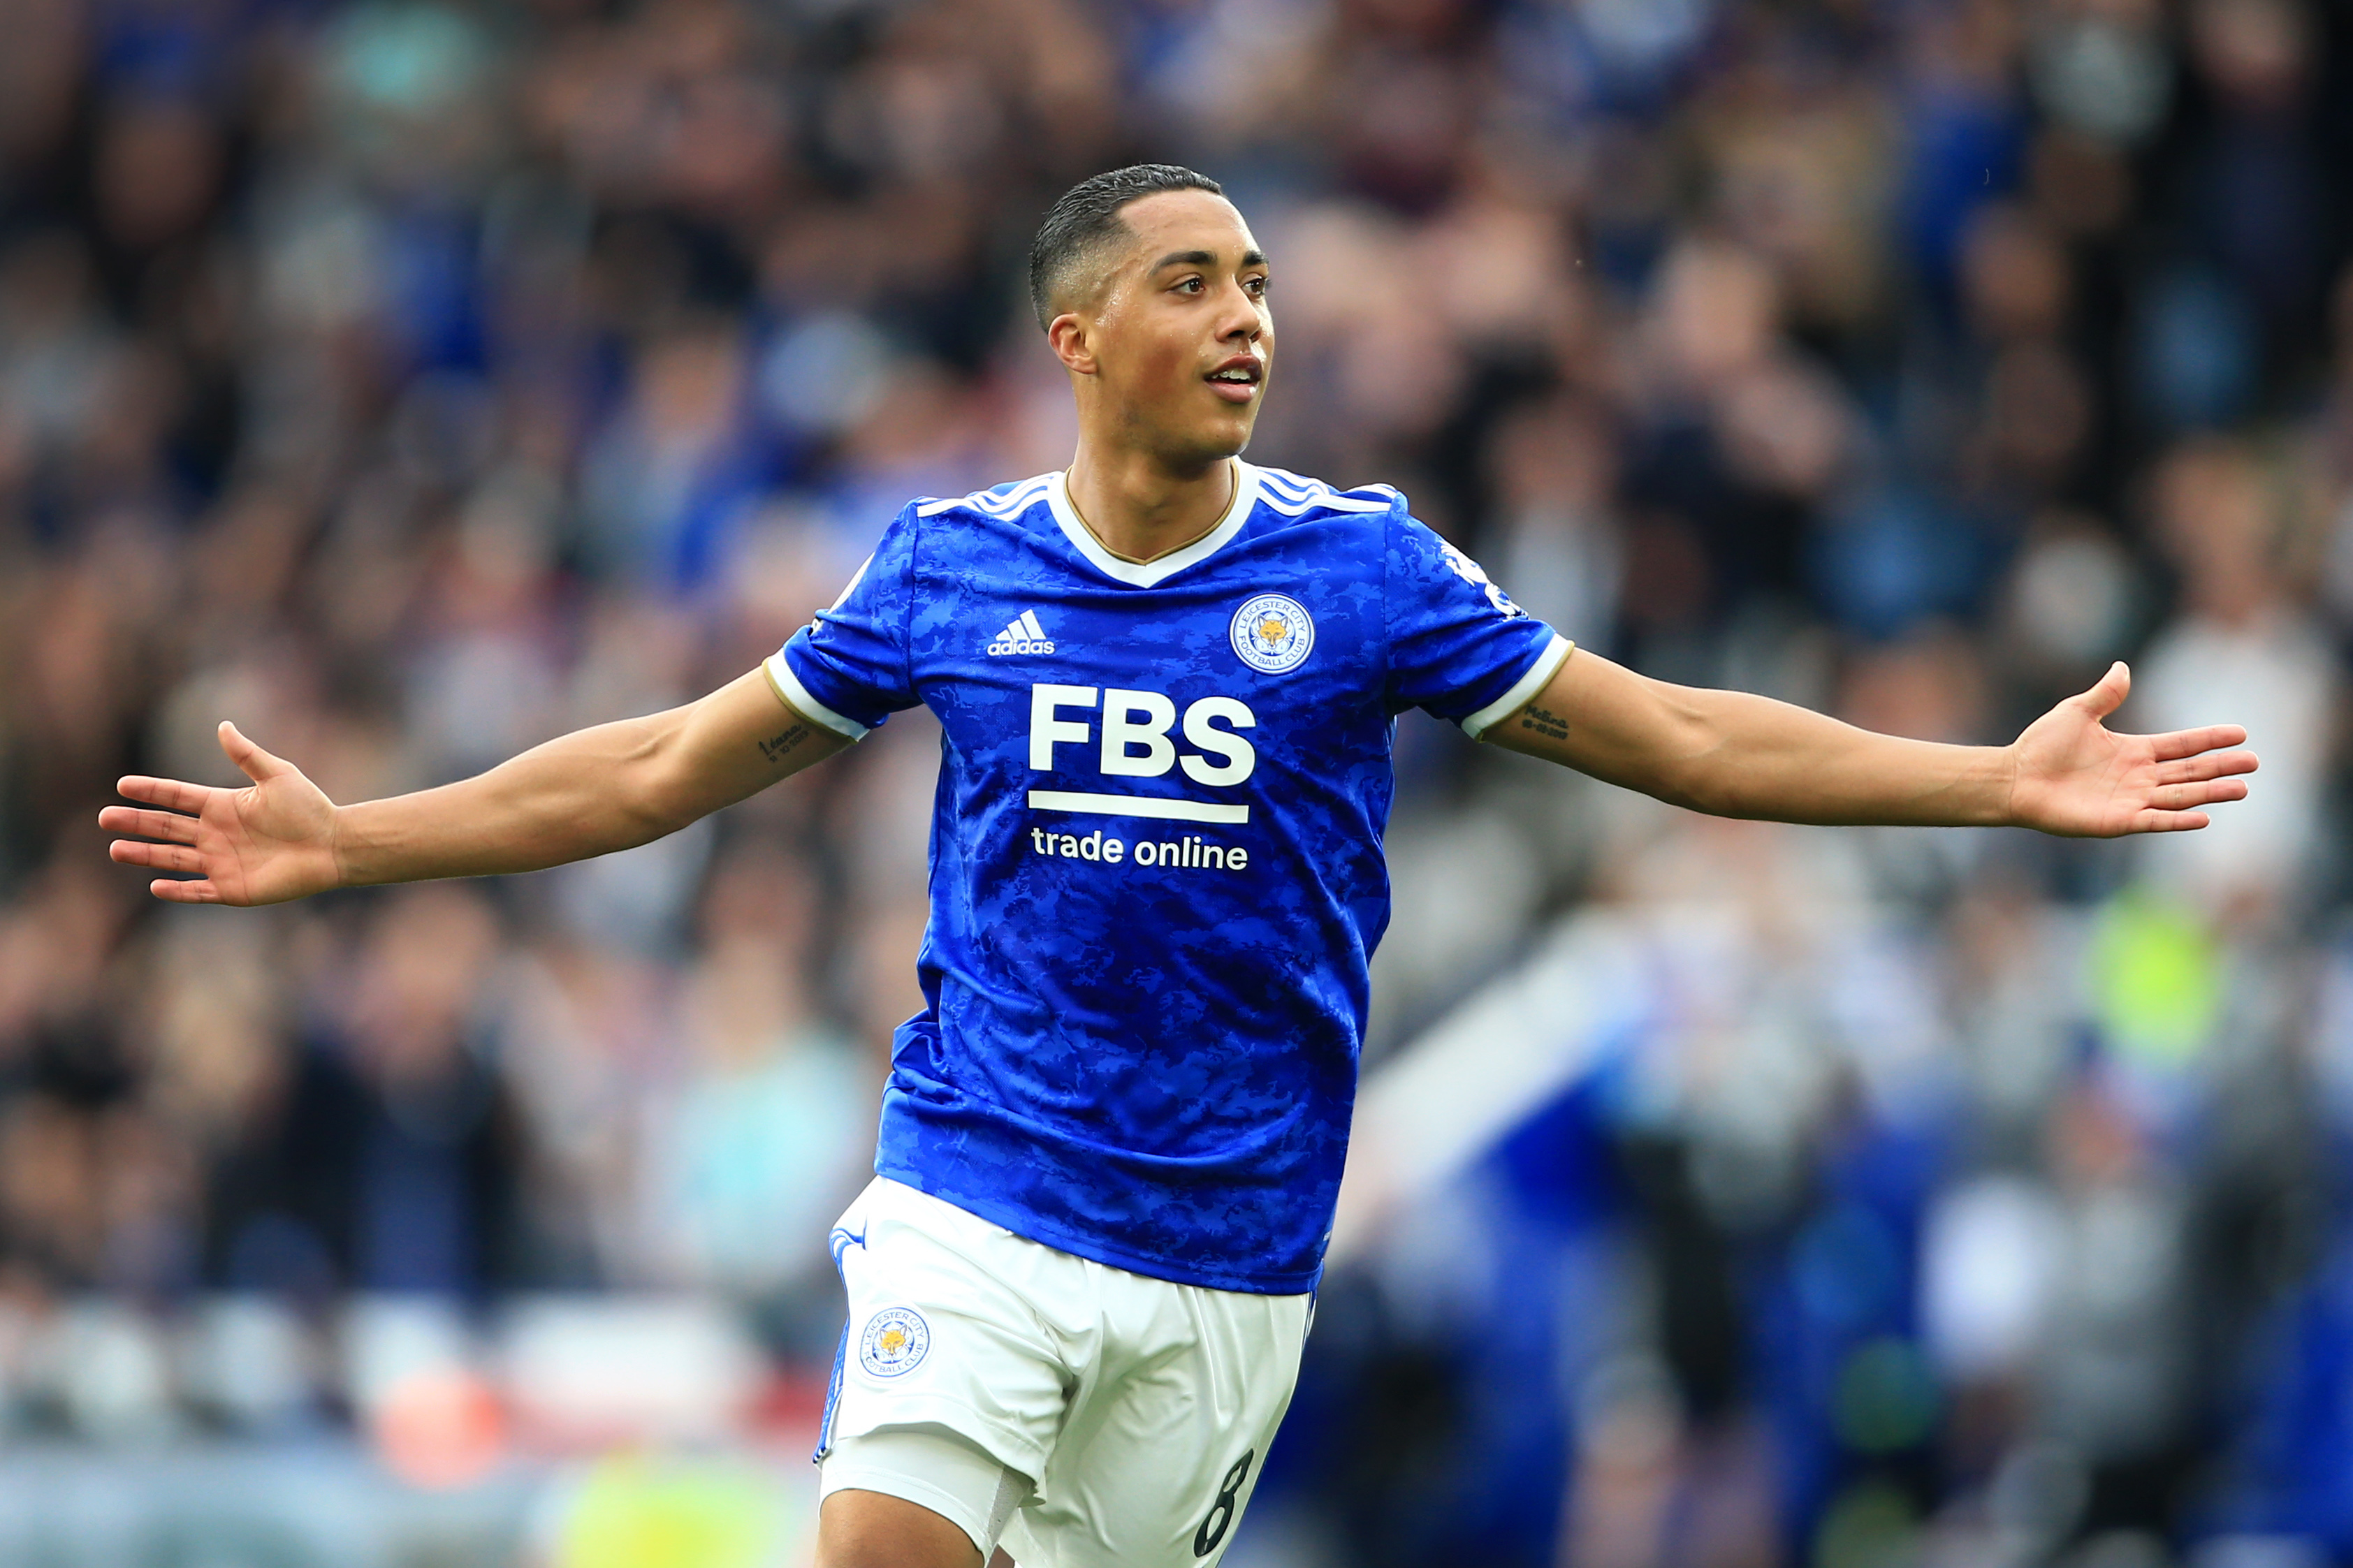 Arsenal speak with £120k-a-week star's agent as Gunners aim to land long-term transfer target Tielemans 